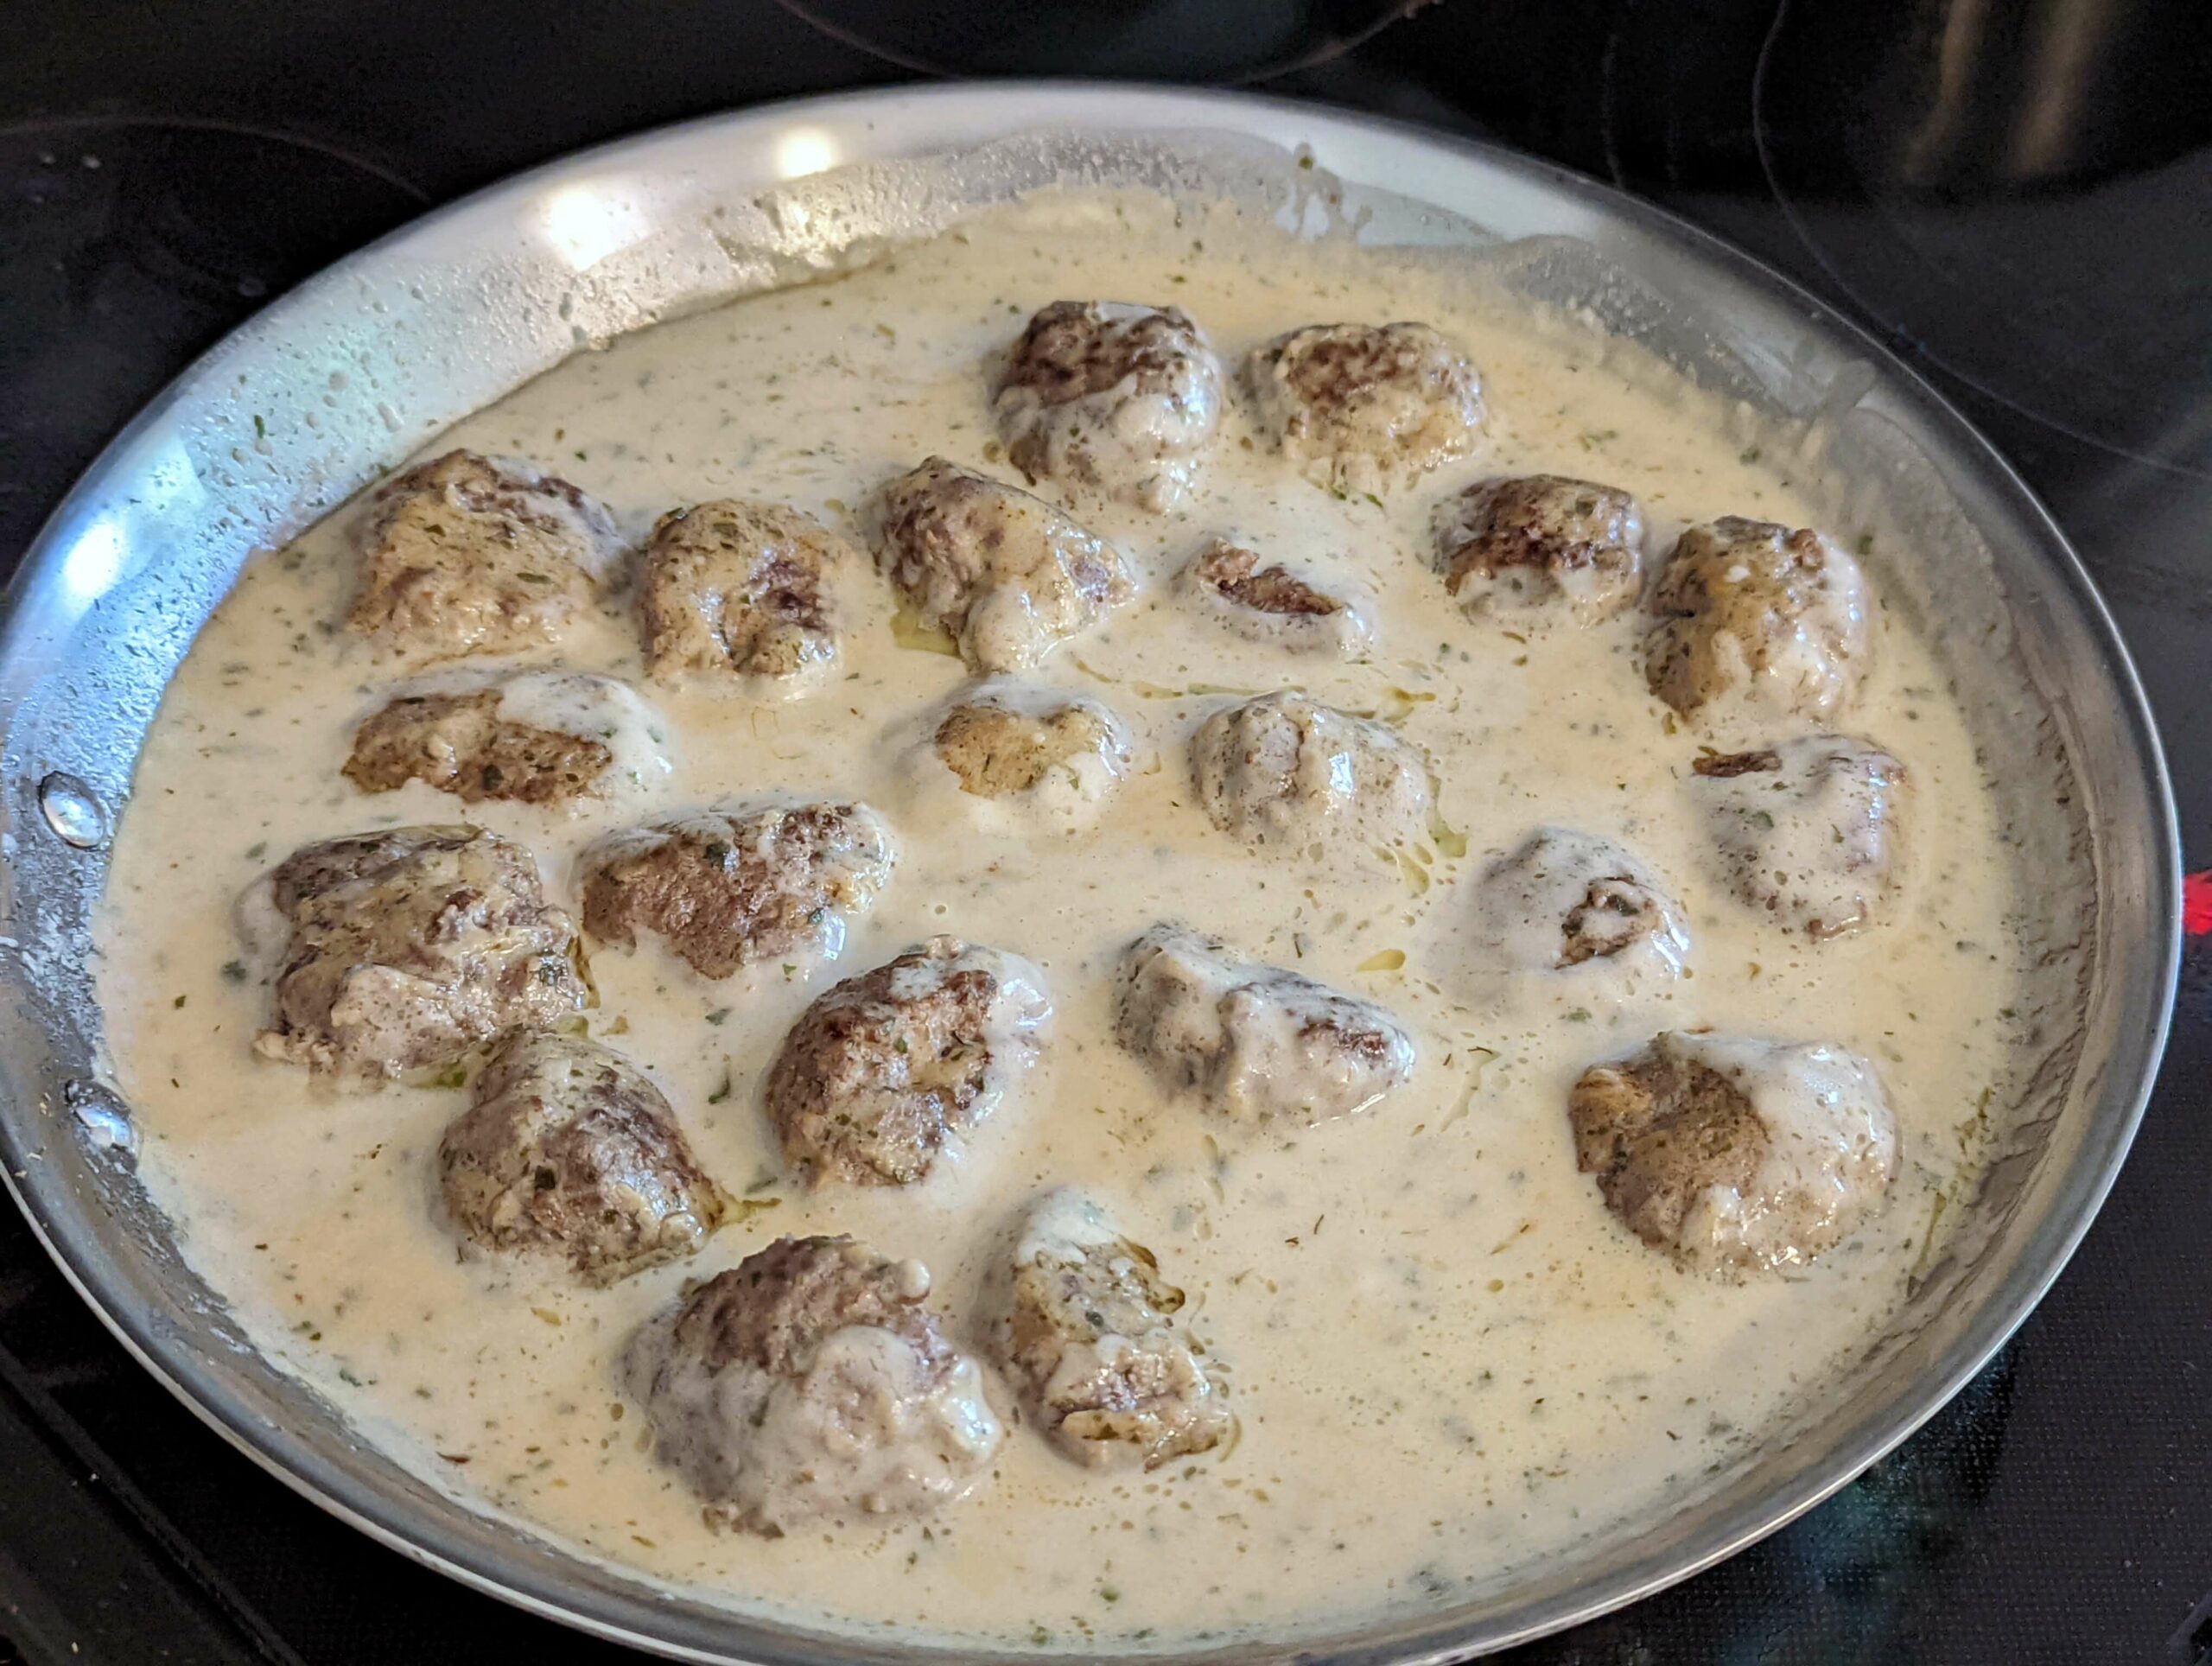 Finish cooking the meatballs in a saute pan.